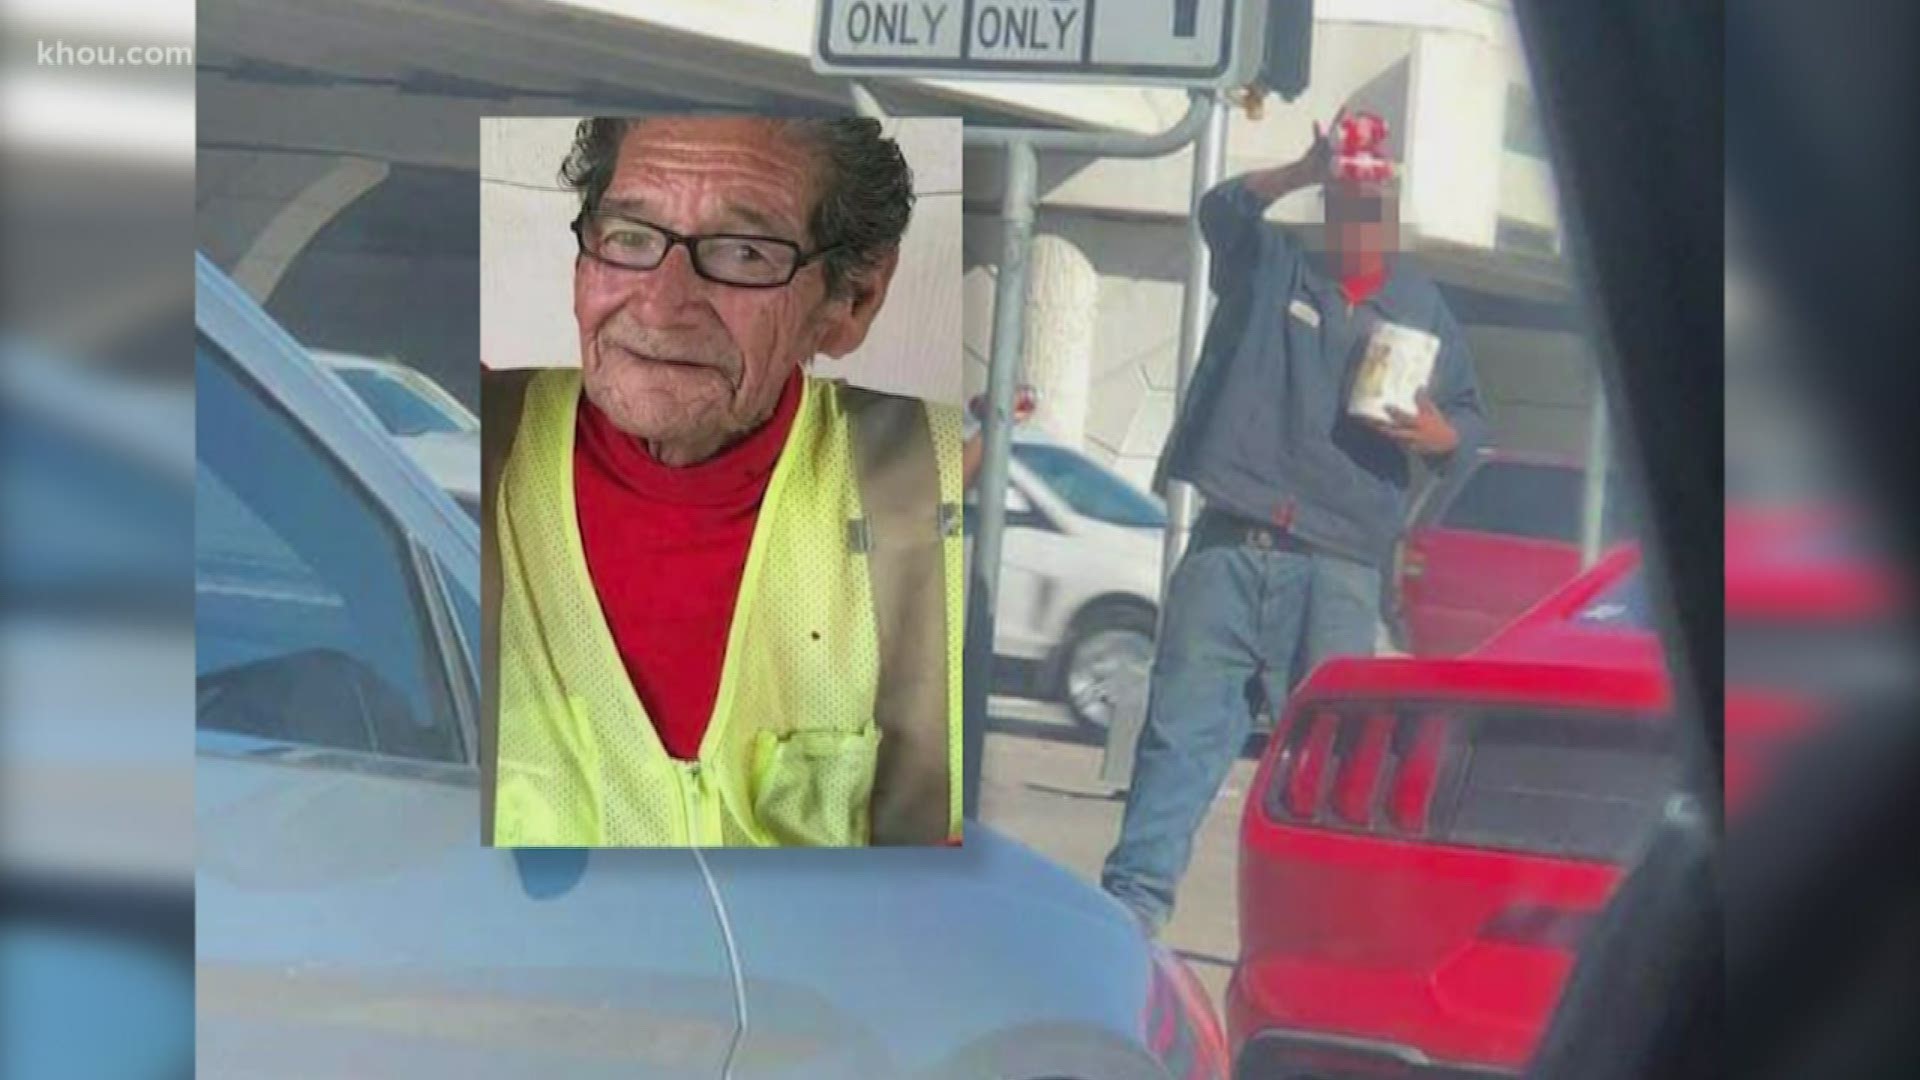 A family says their dad died in a hit-and-run about a year ago and now panhandlers are using his picture to get money from strangers.